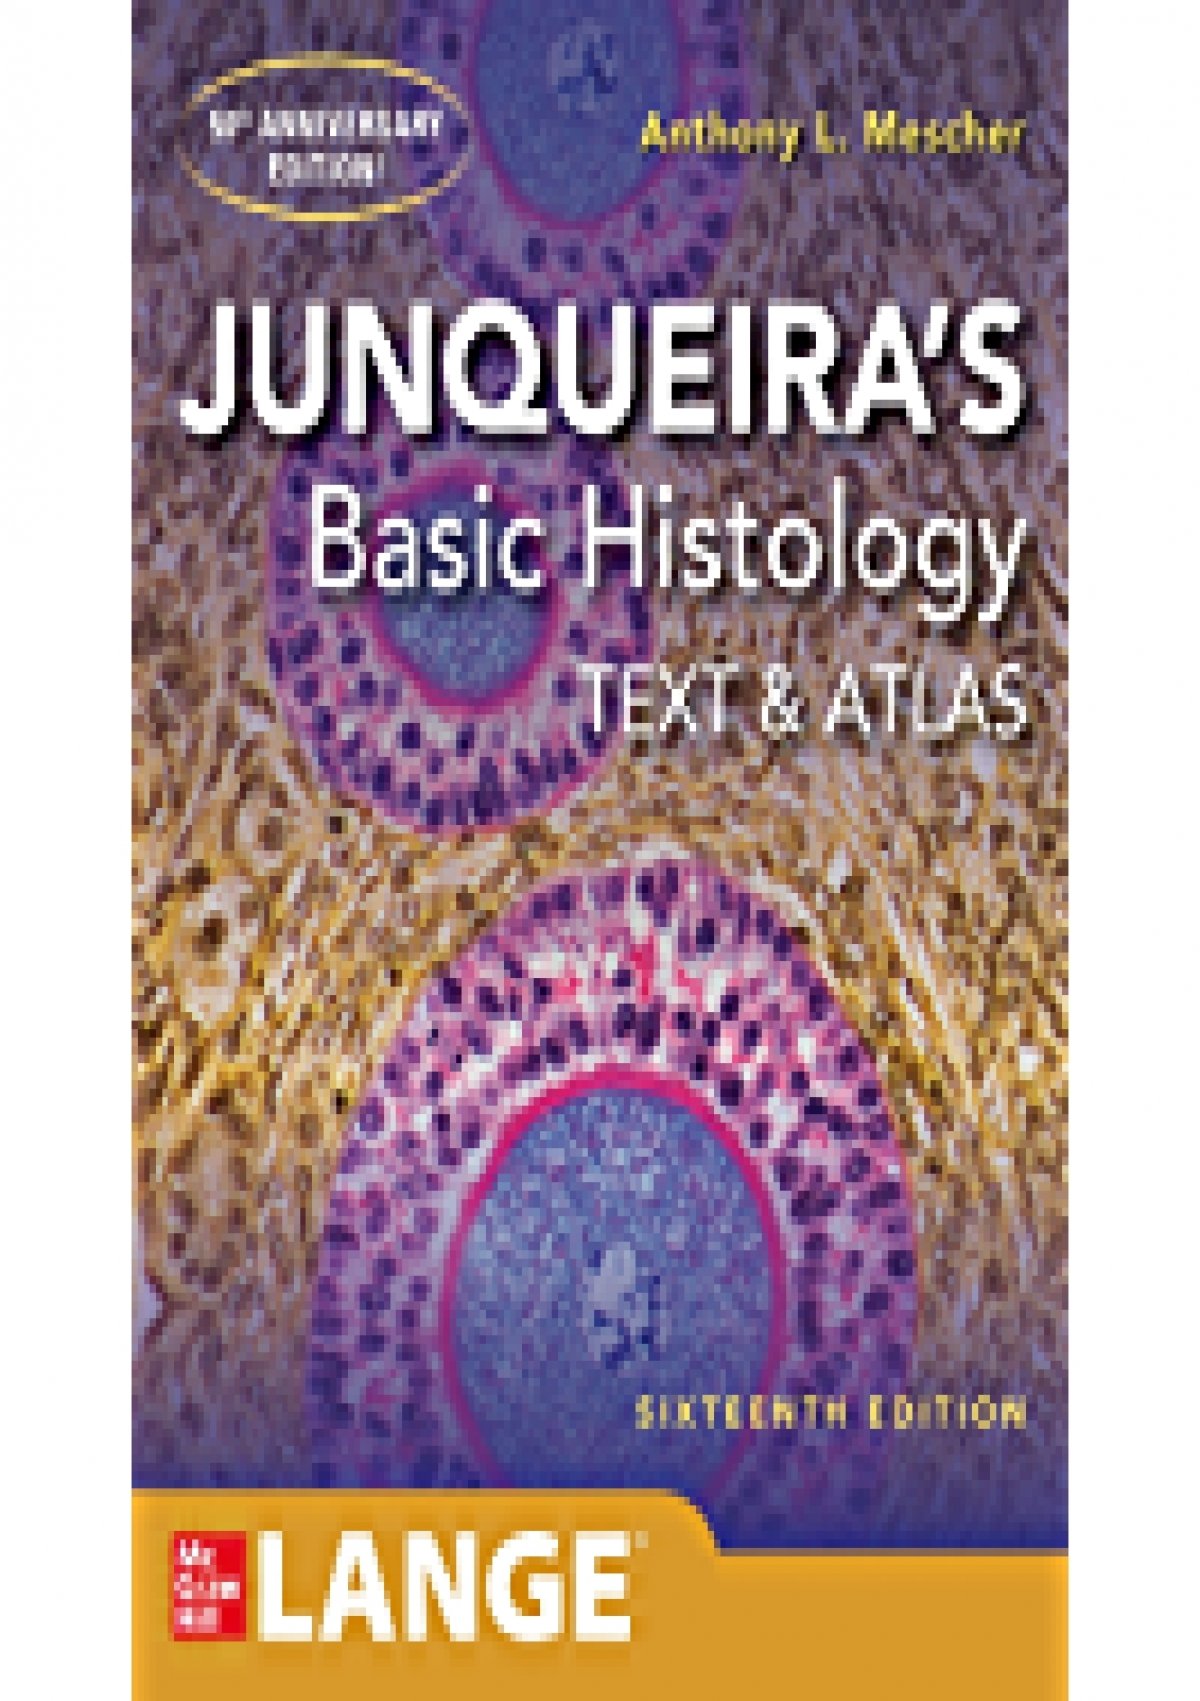 PDF EBOOK DOWNLOAD Junqueira's Basic Histology: Text and Atlas